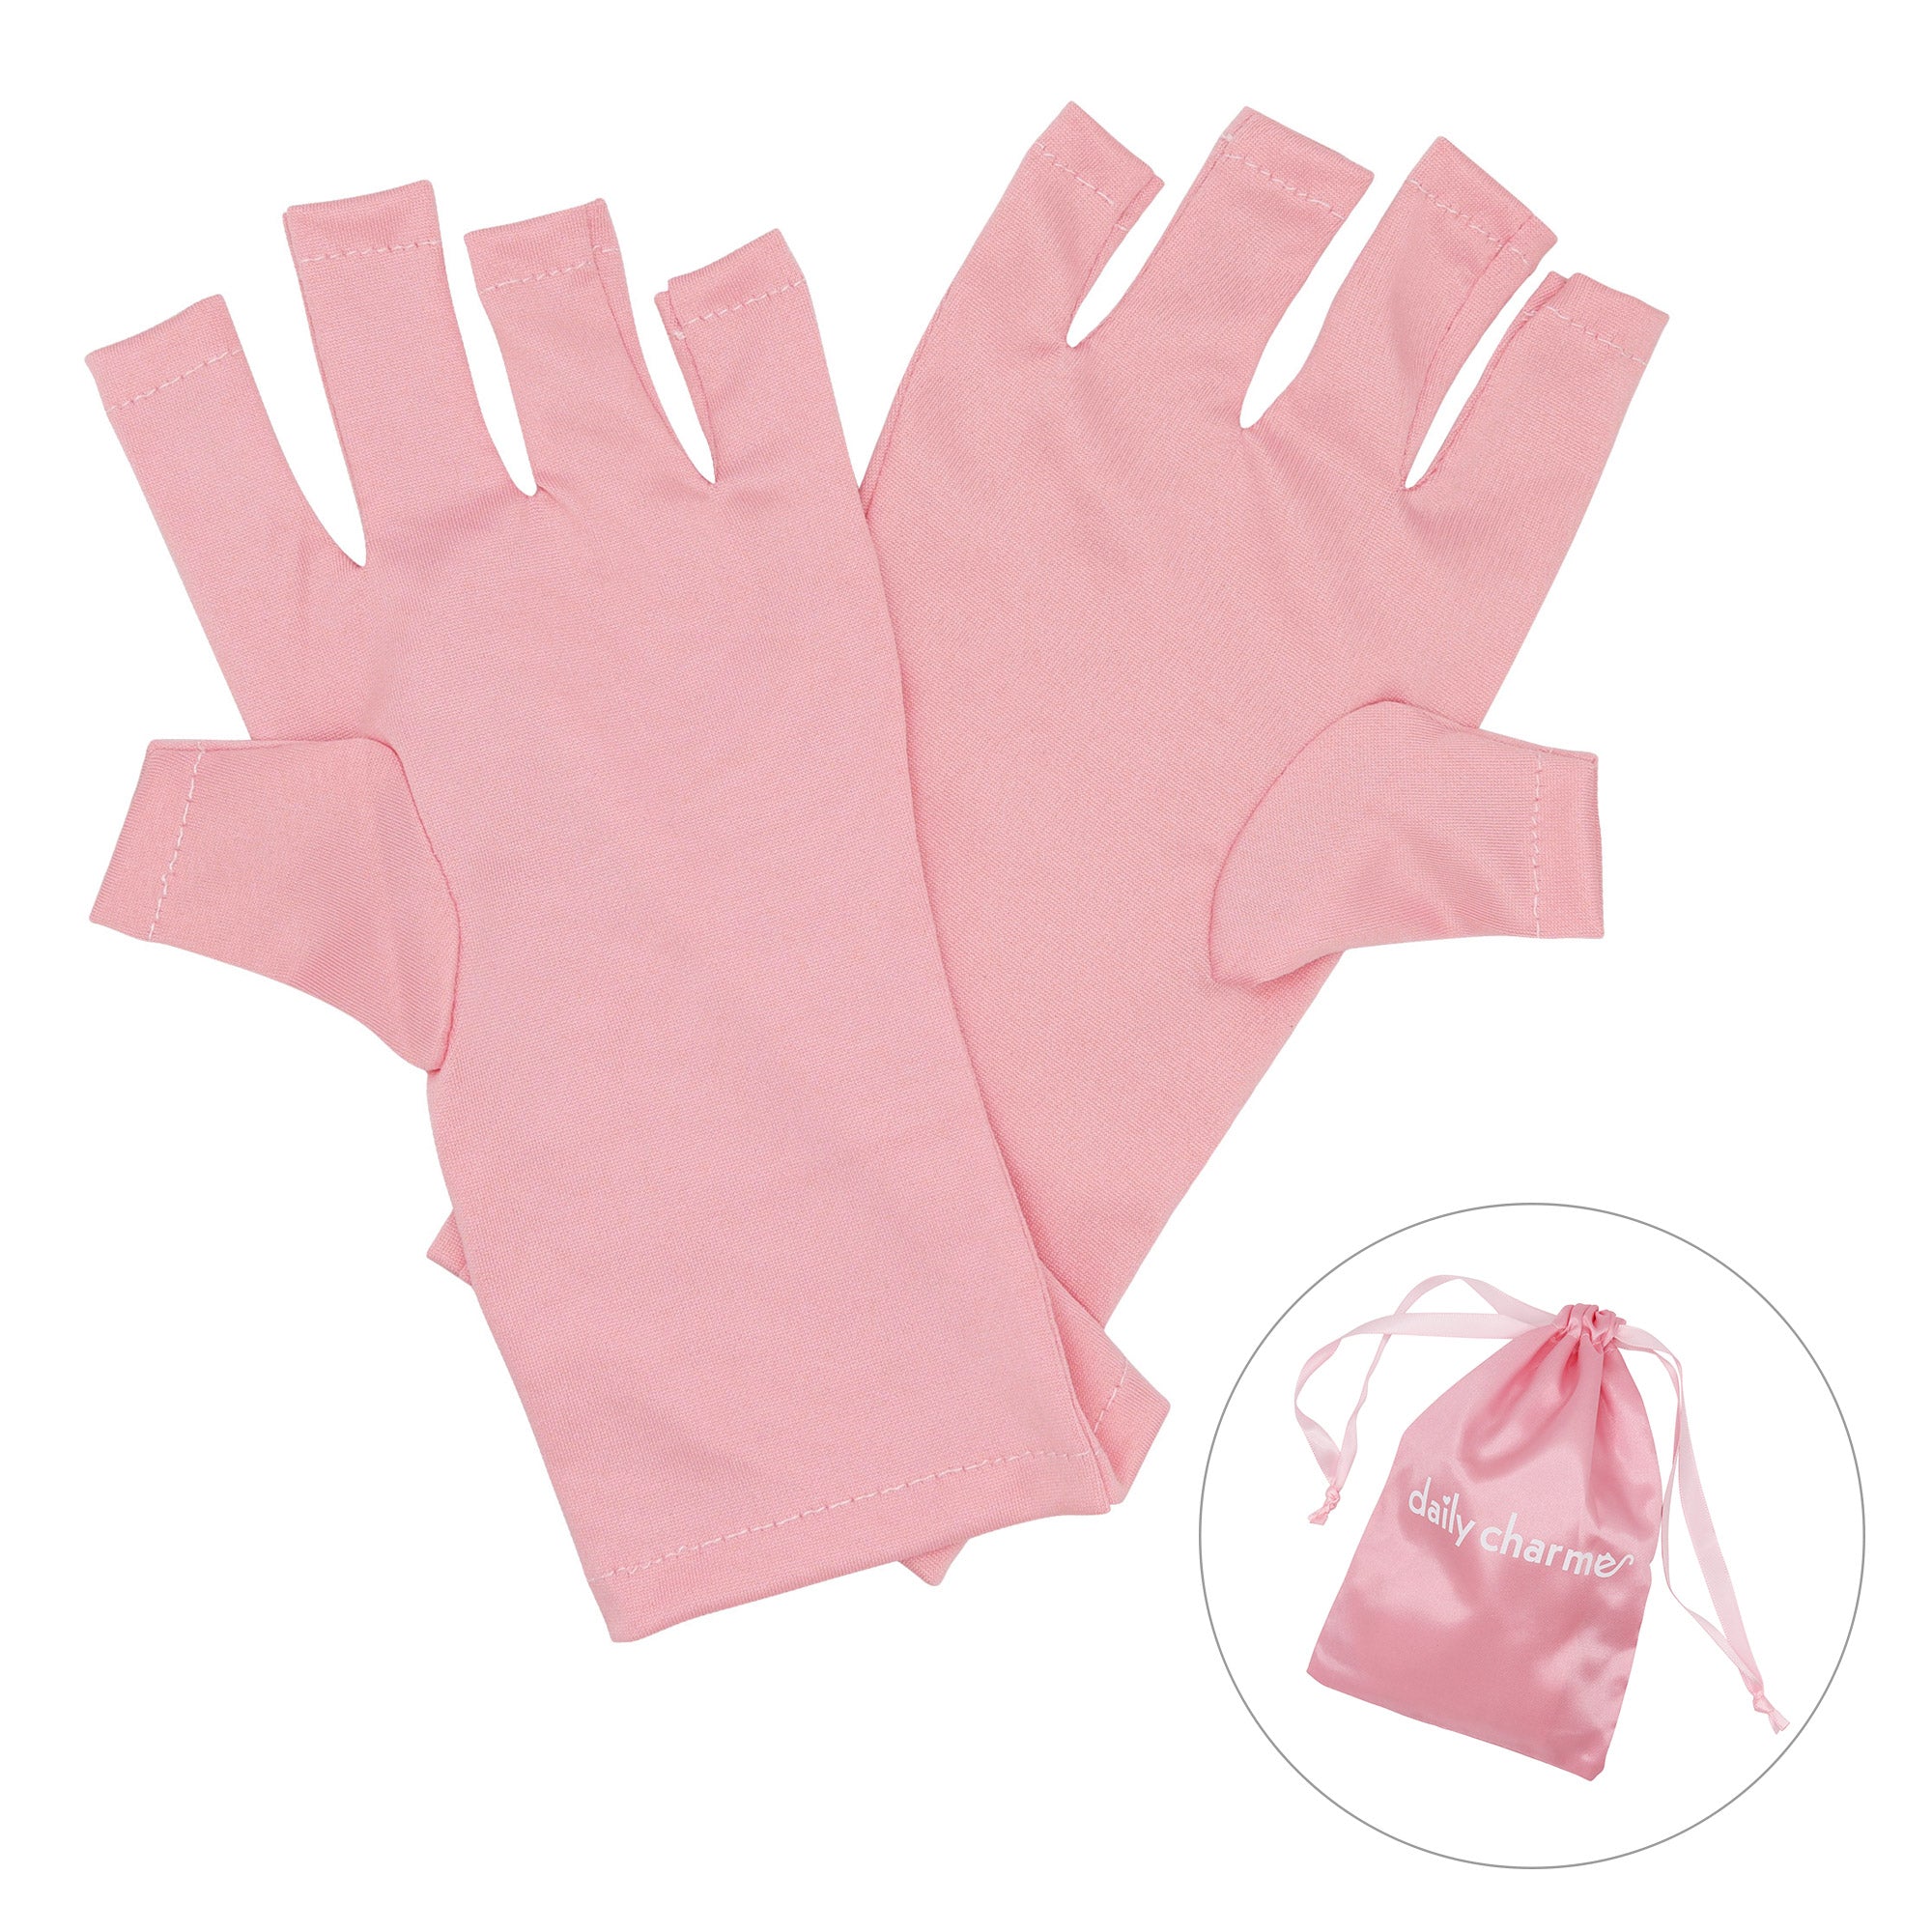 Gel Manicure UV Gloves / Pink DIY Nail Tech Protection